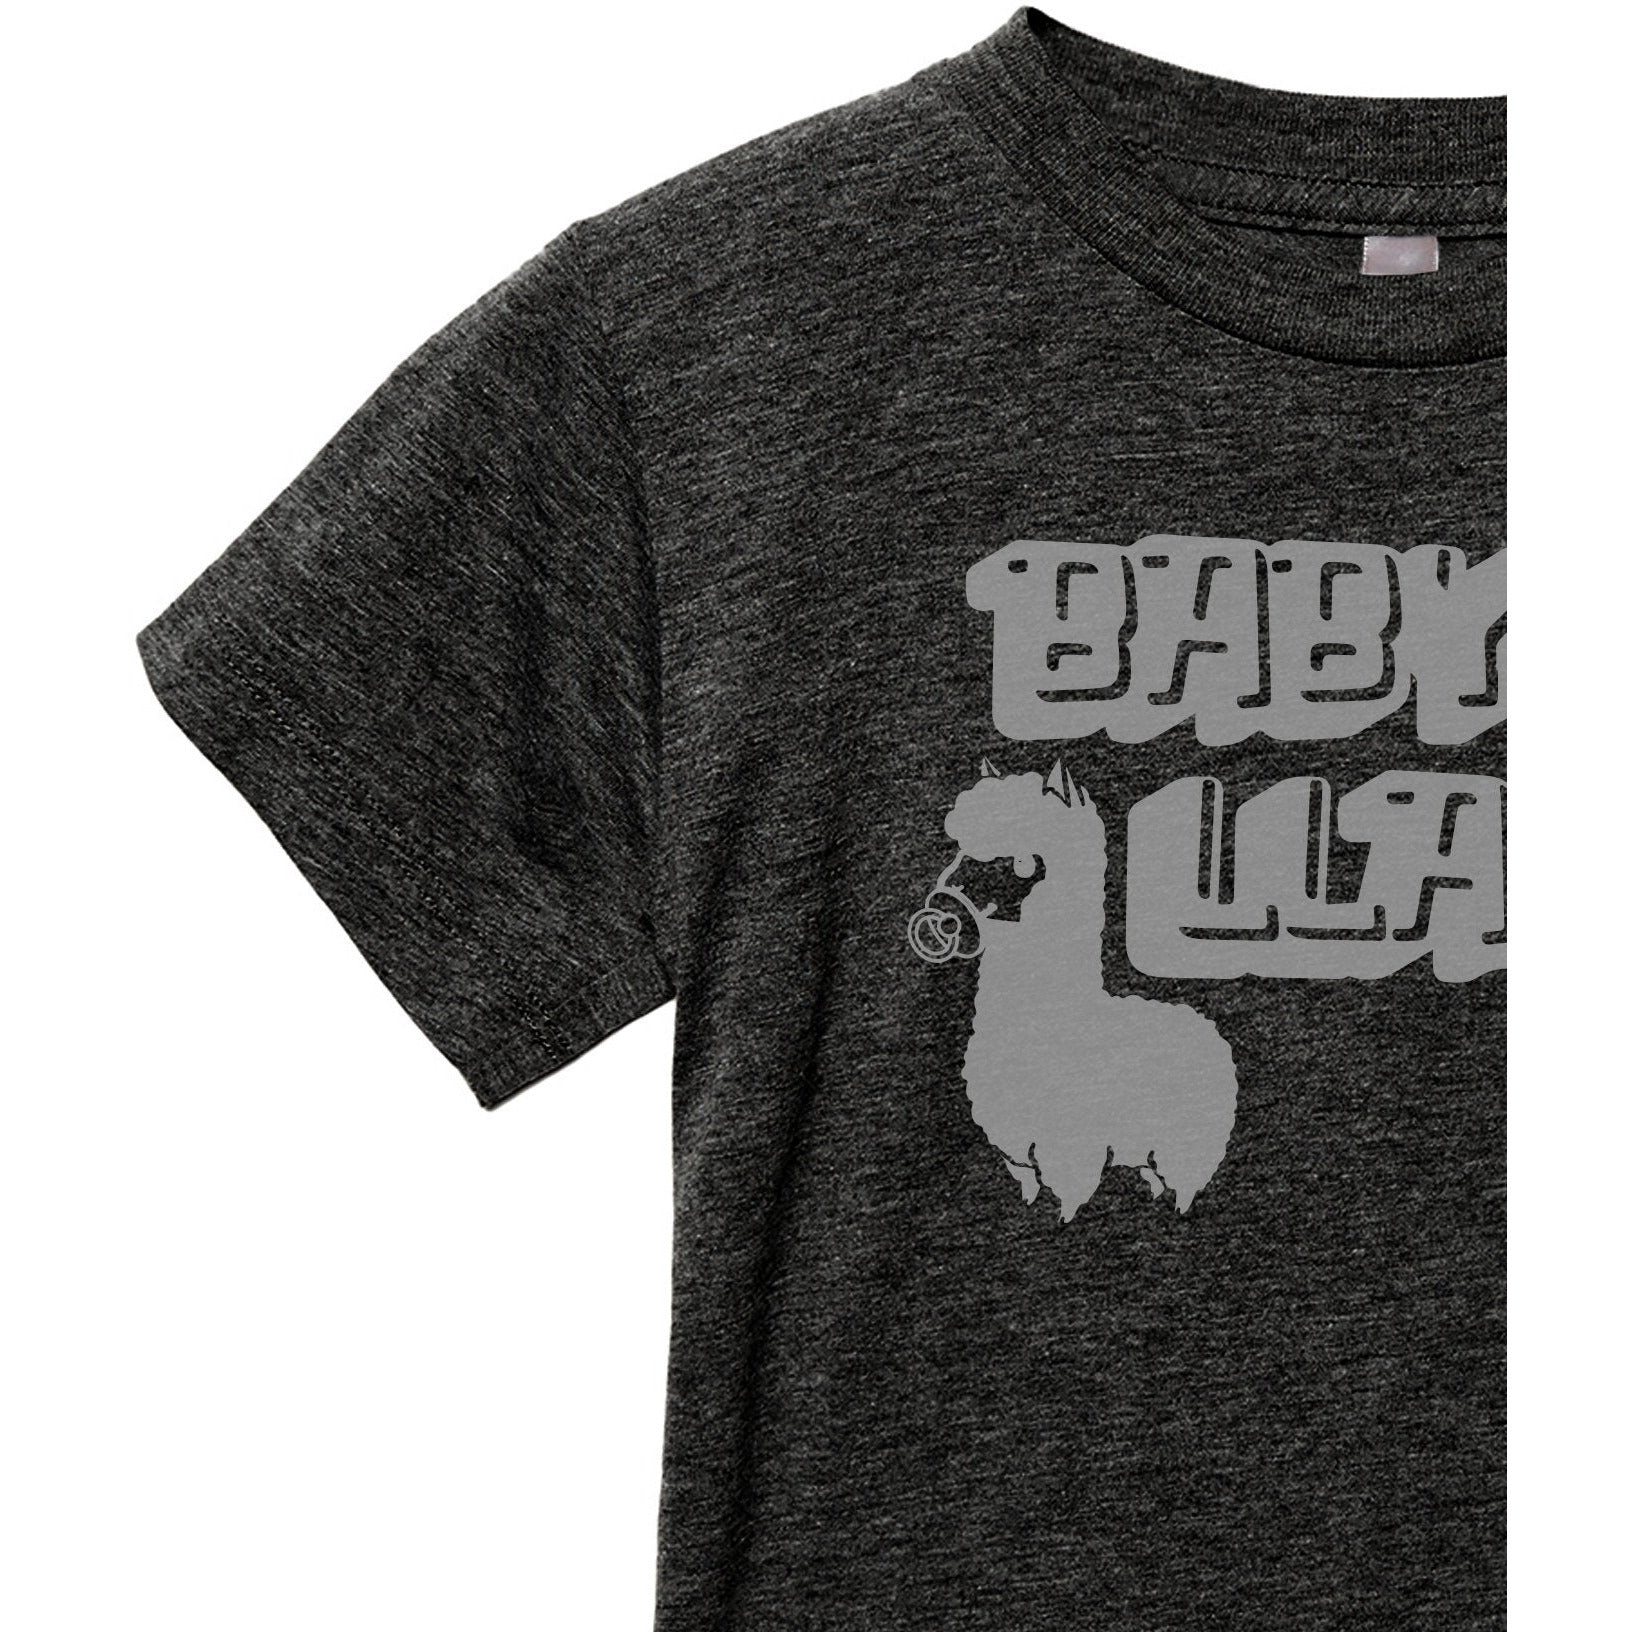 Baby Llama - Stories You Can Wear